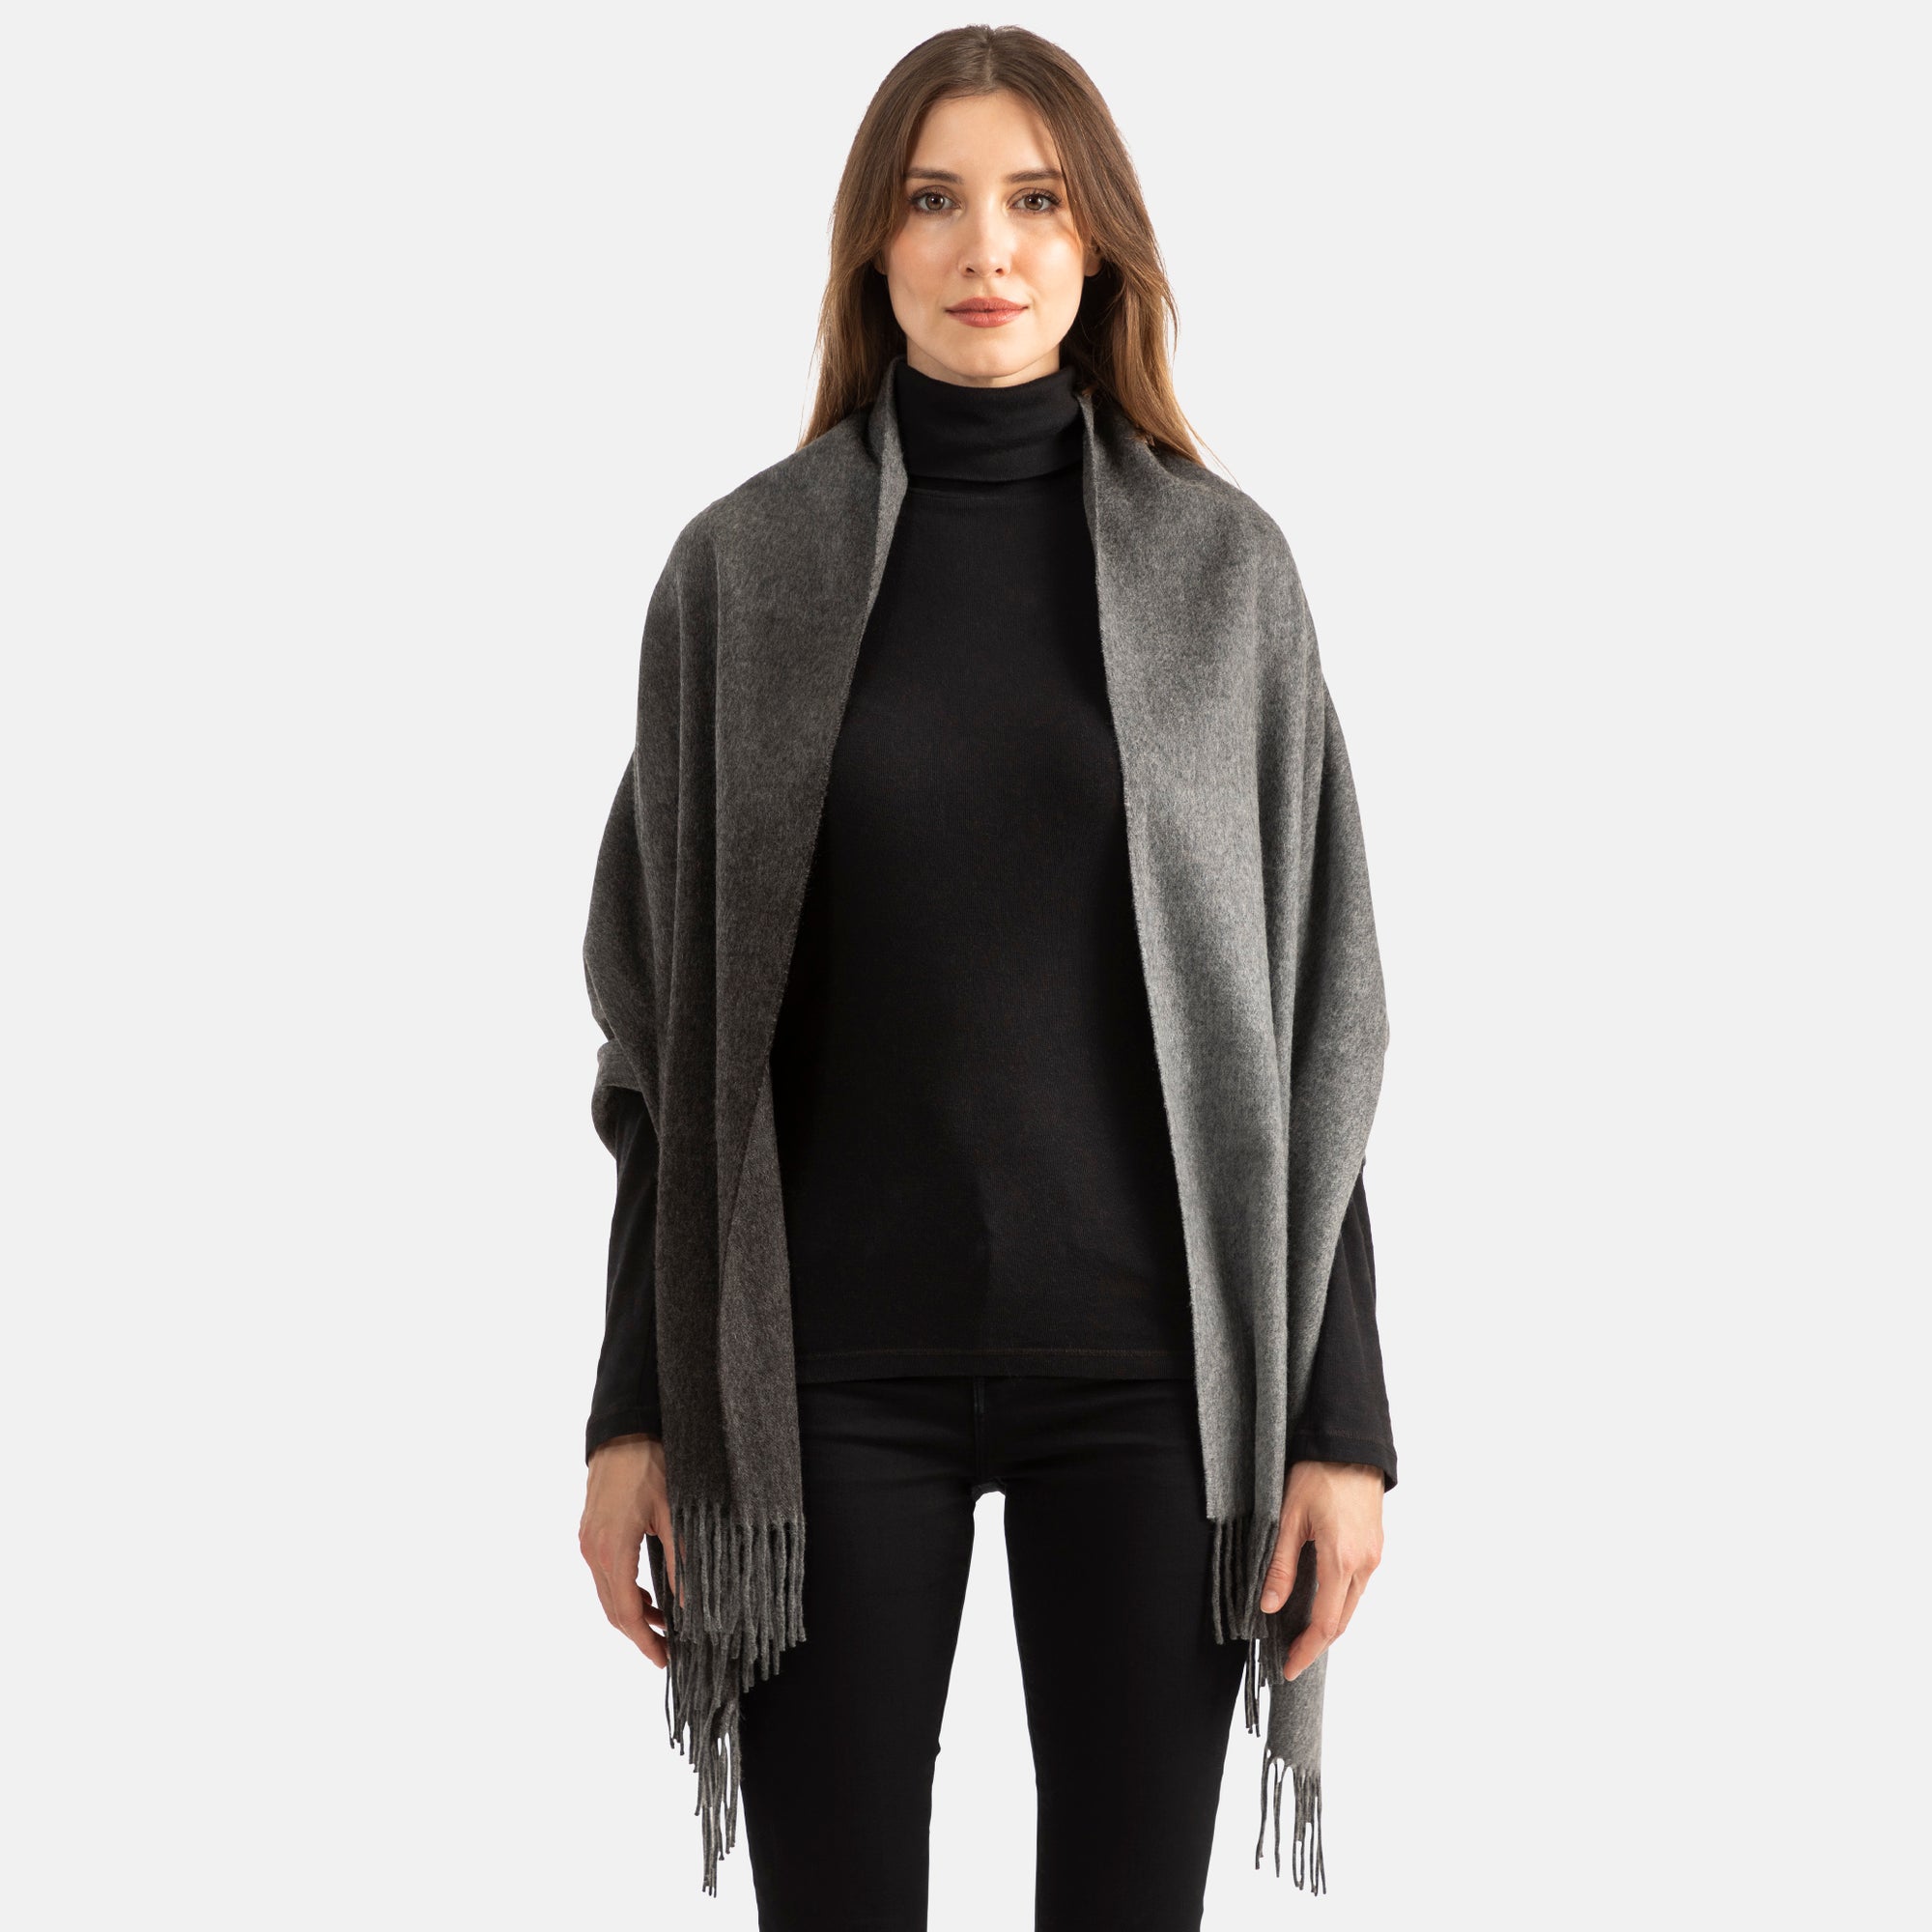 Picture of a woman wearing a double face, long woven cashmere wrap with fringe,in two tones of grey with ombre design.